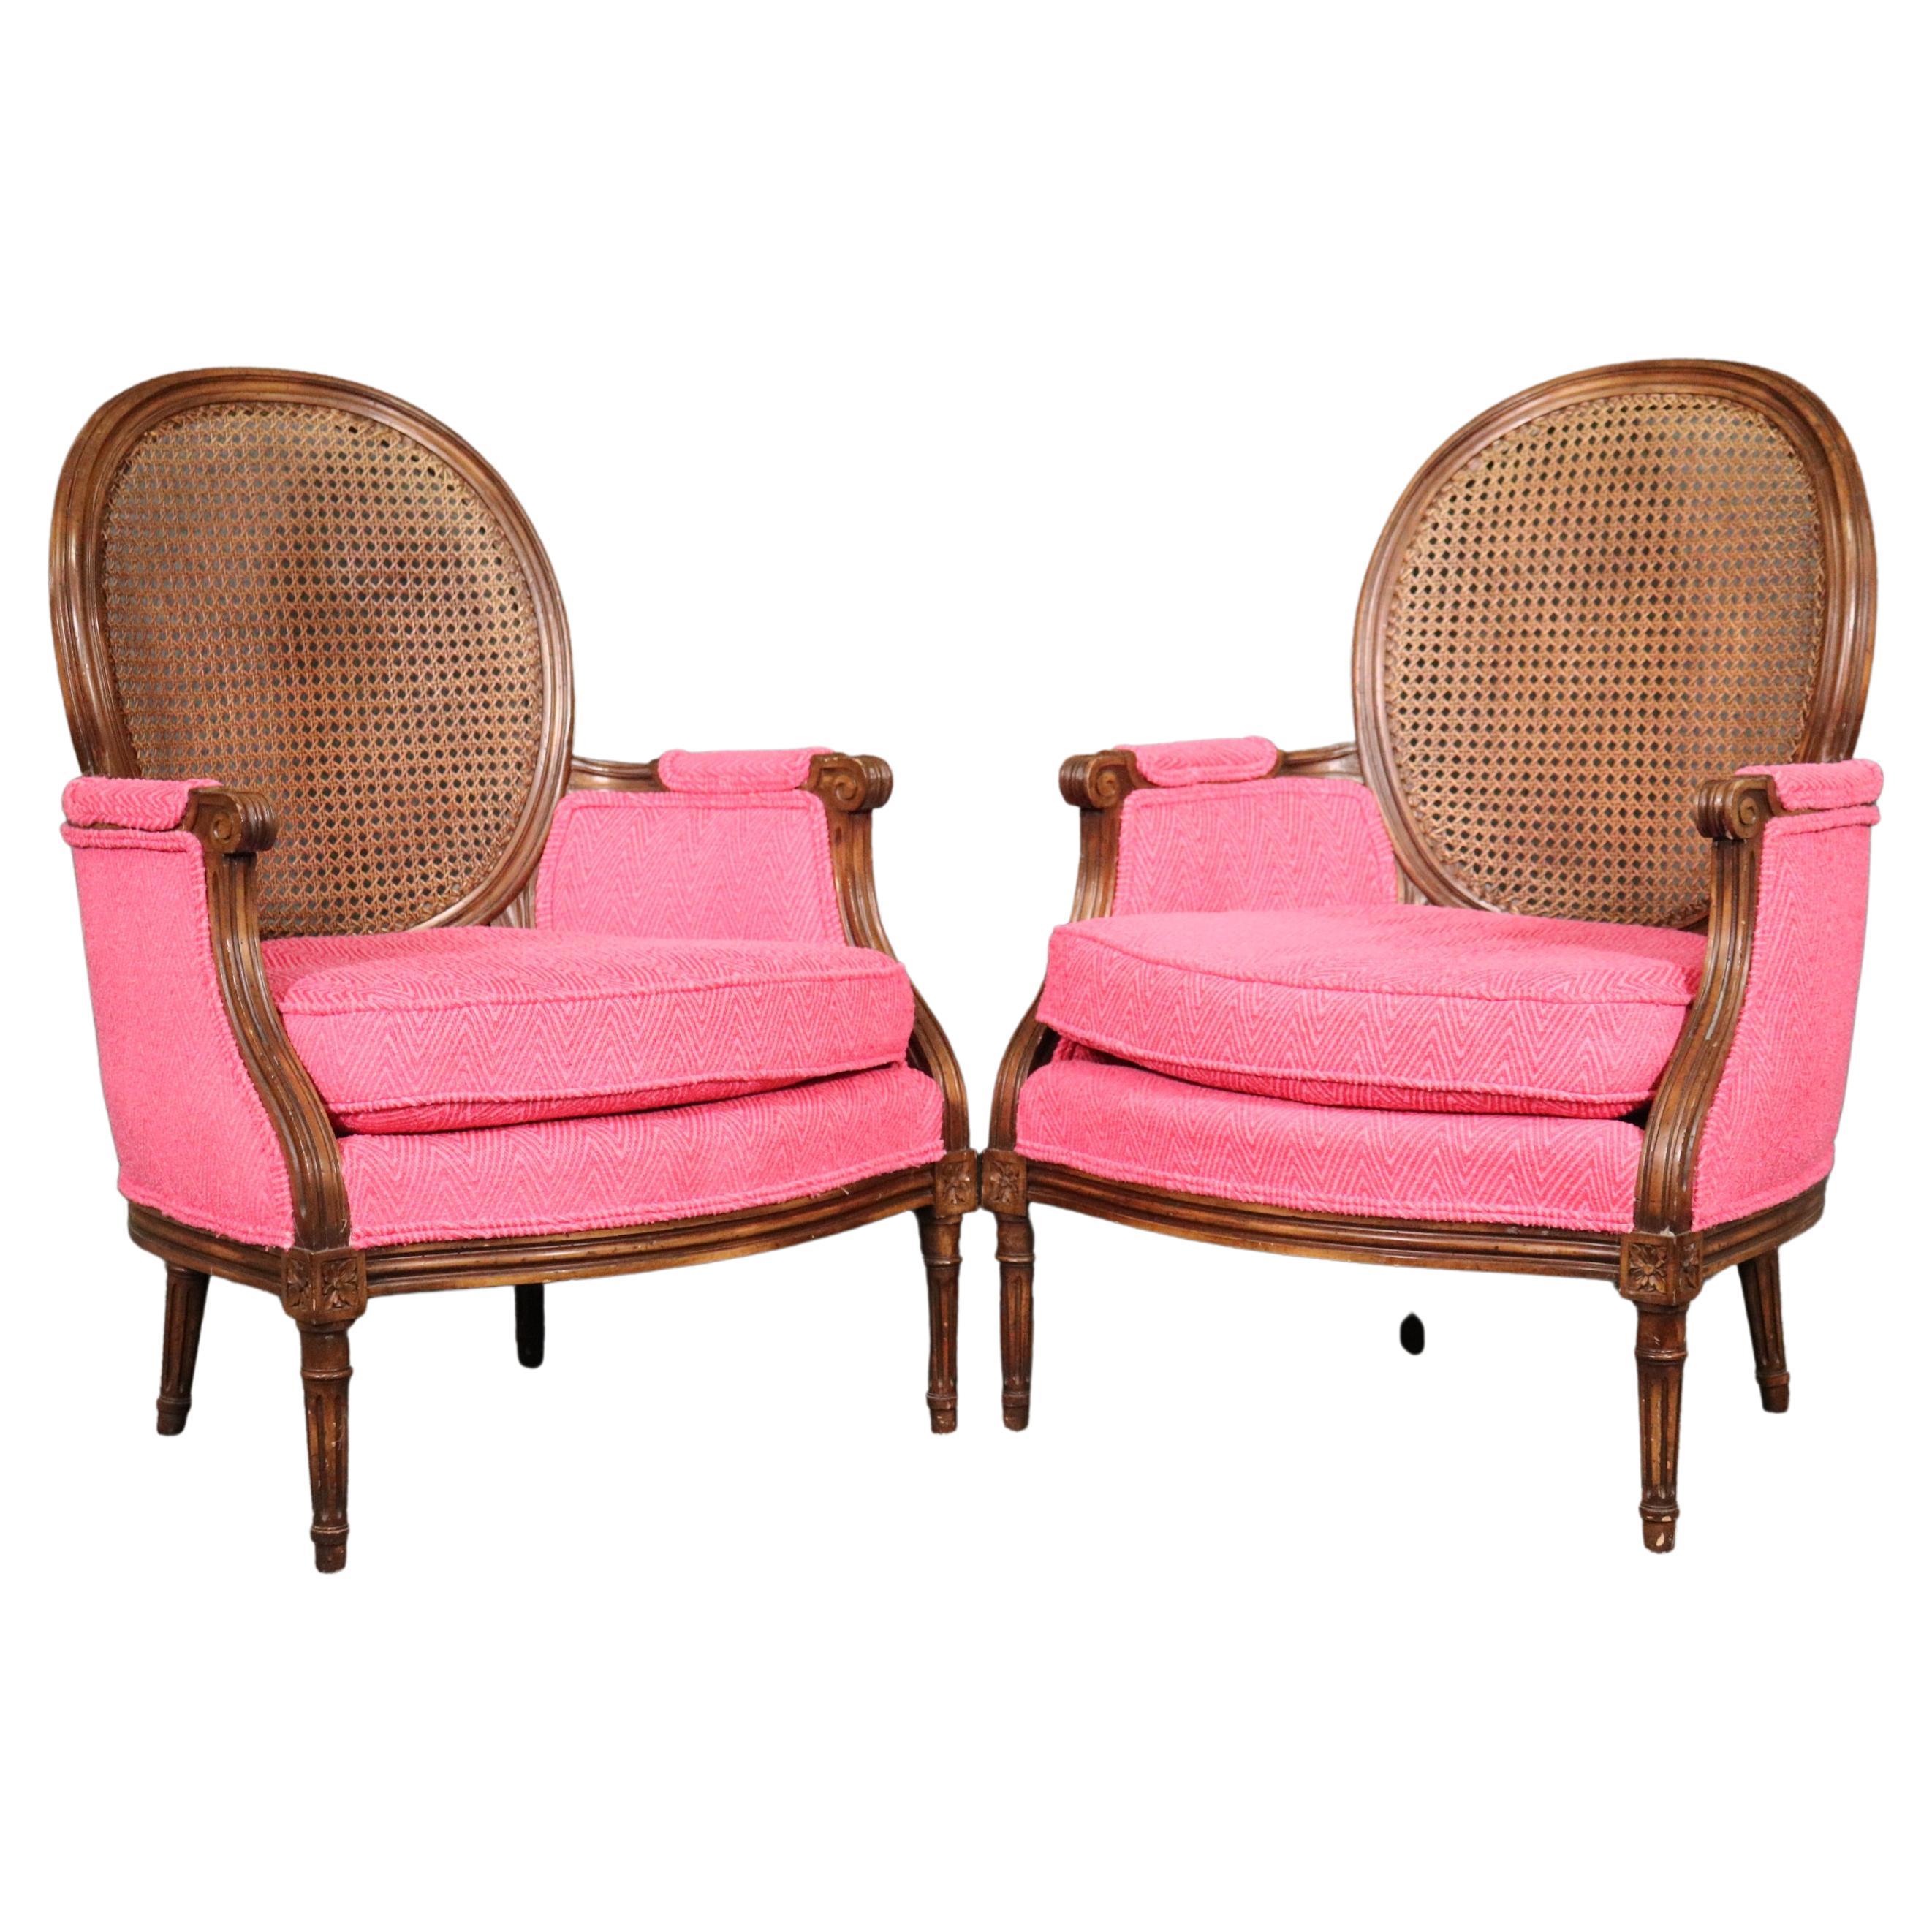 Unique Pair of French Louis XVI Style Walnut Cane Back Bergere Chairs Circa 1960